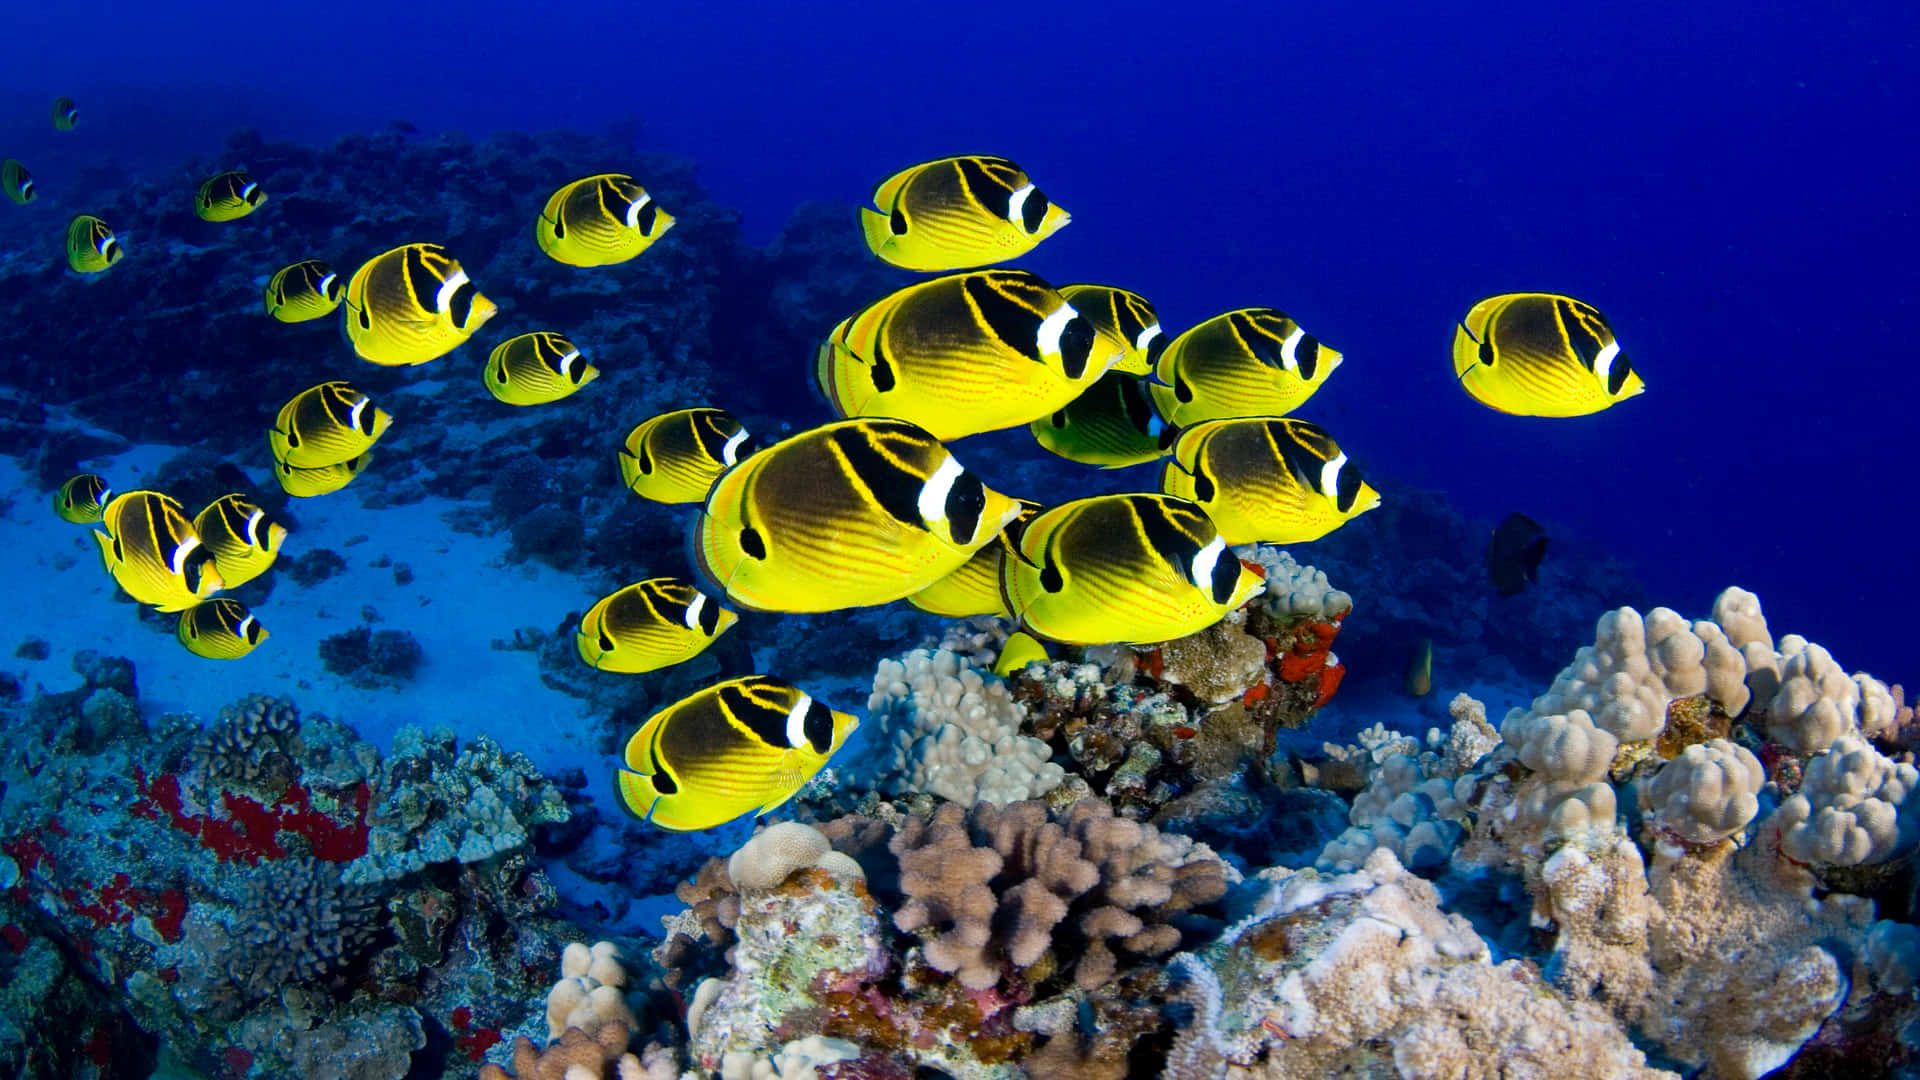 Schoolof Yellow Butterflyfish Swimming Over Coral Reef Wallpaper